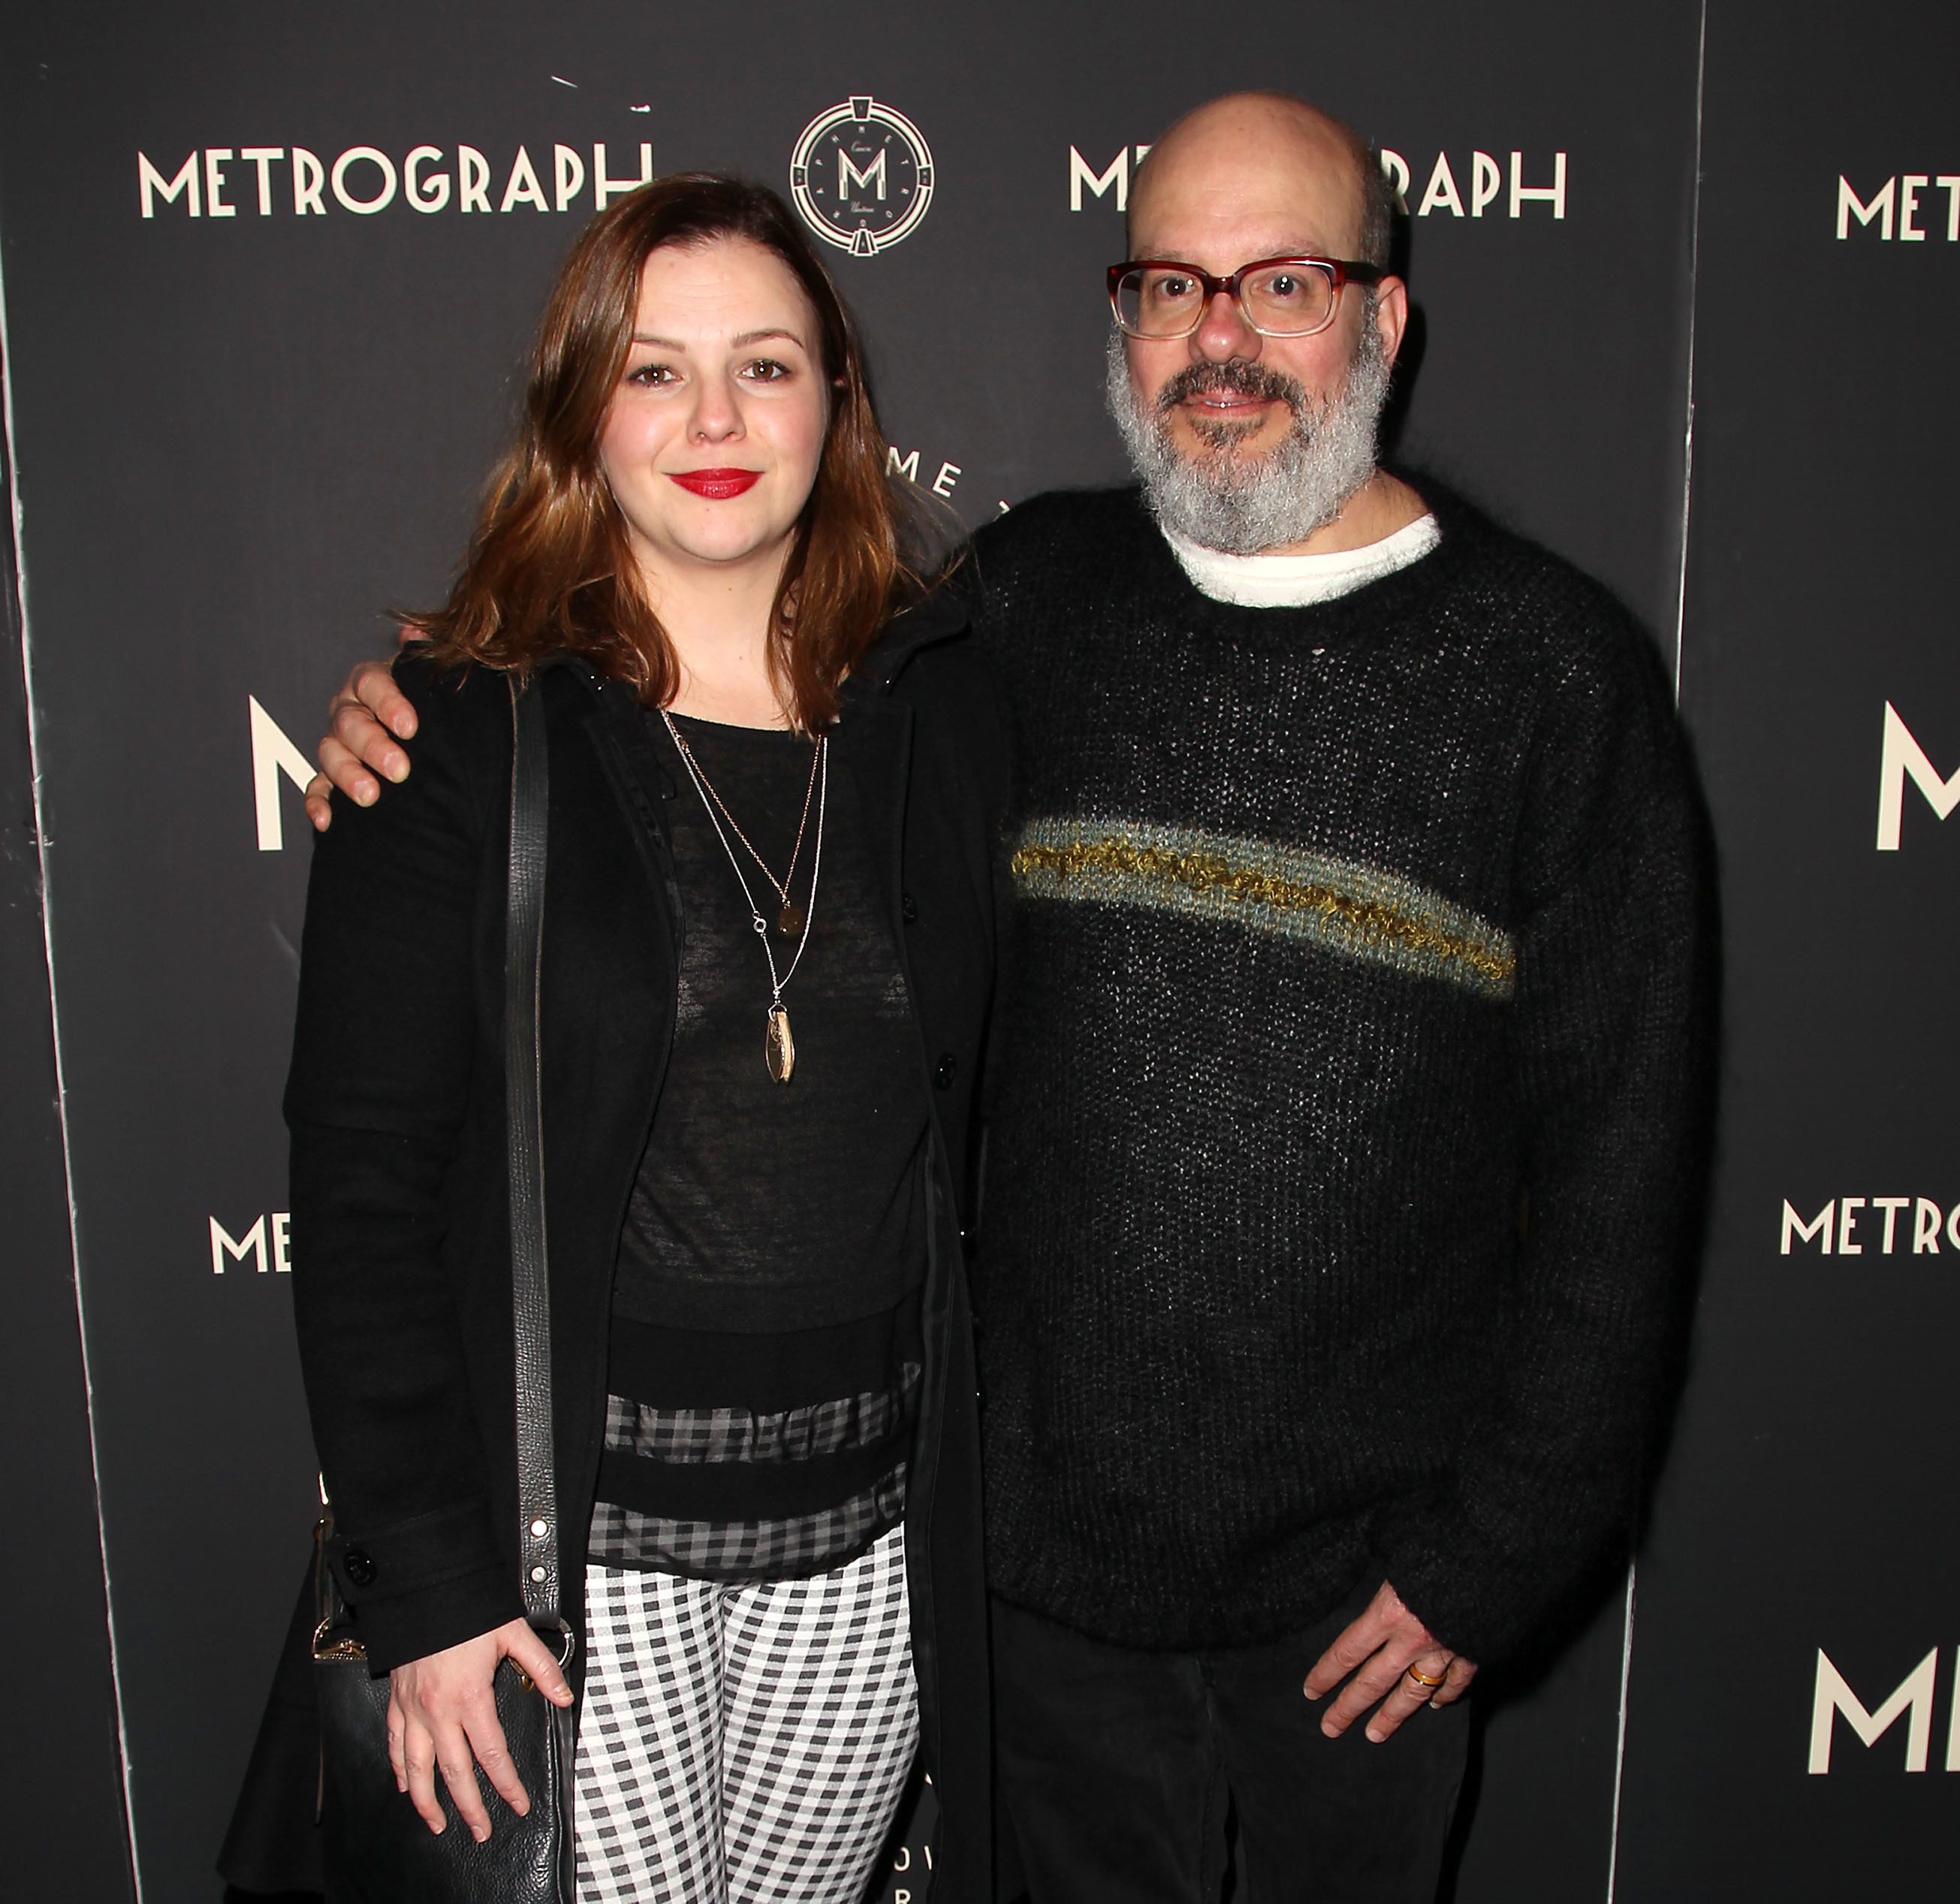 <p>David Cross and Amber Tamblyn, who randomly met and connected on a flight to Louisiana in 2009, tied the knot back in 2012. The funnyman is 19 years older than the actress, who gave birth to <a href="https://www.wonderwall.com/news/amber-tamblyn-david-cross-welcome-daughter-1959559.article">their daughter</a> in February 2017.</p>